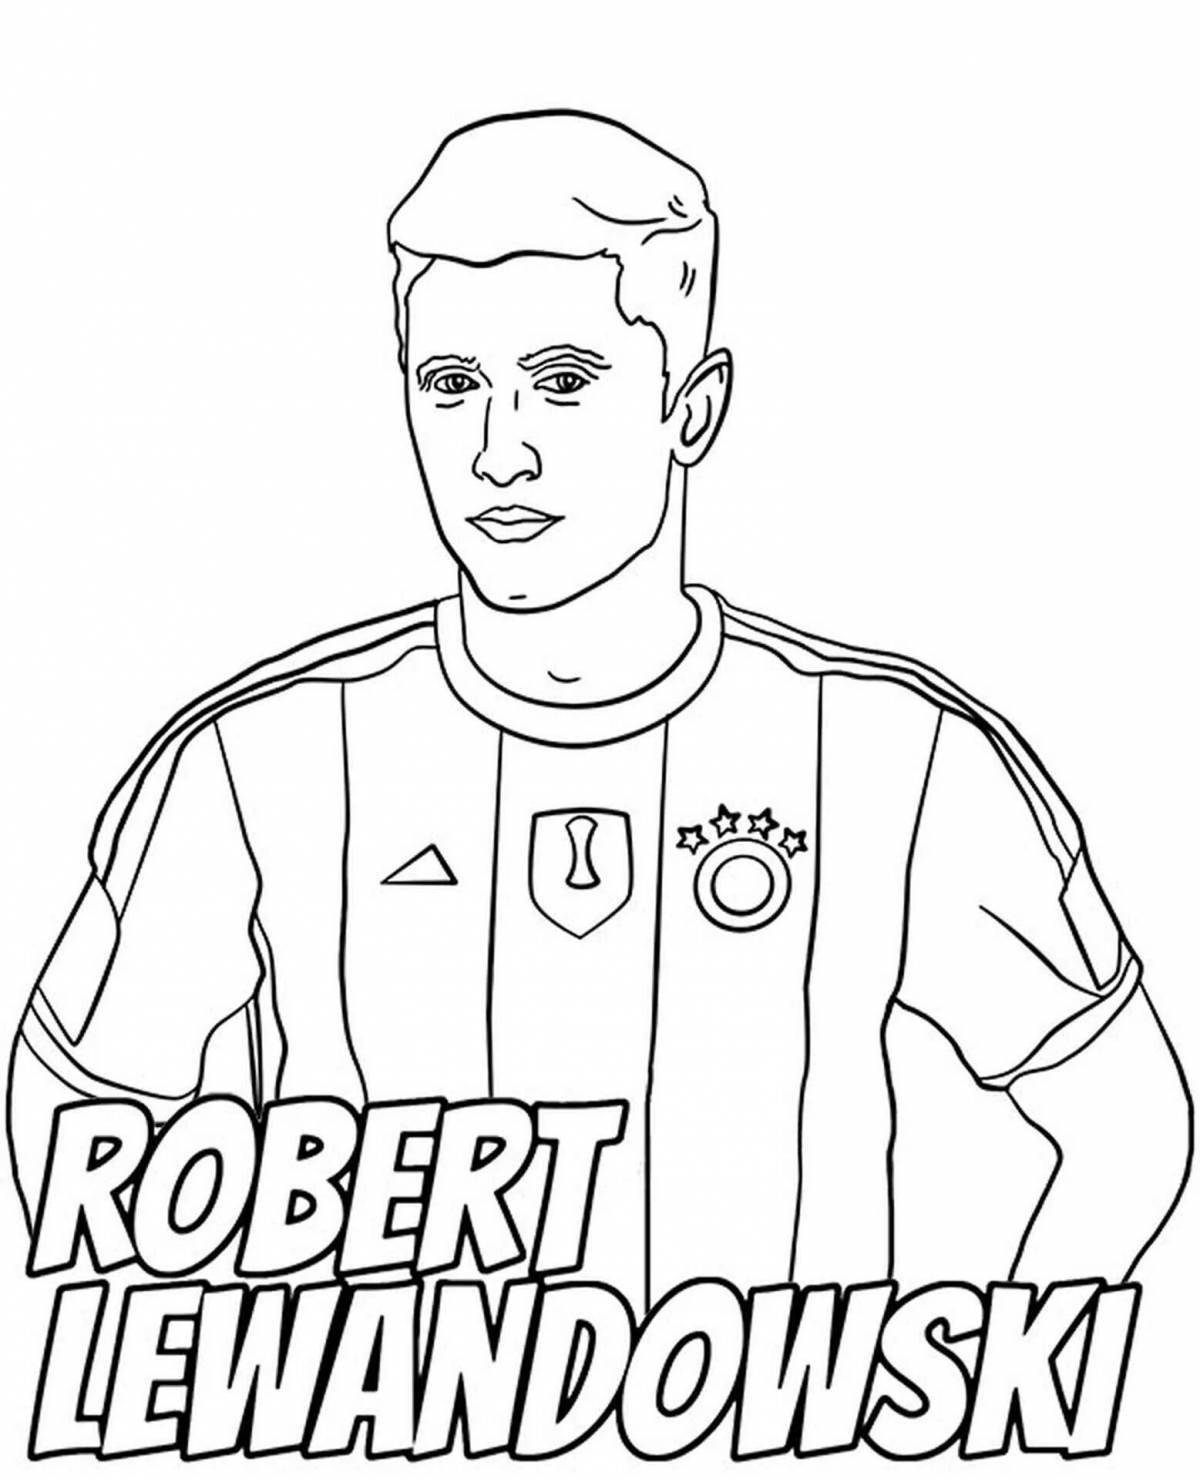 Ingenious coloring of famous football players